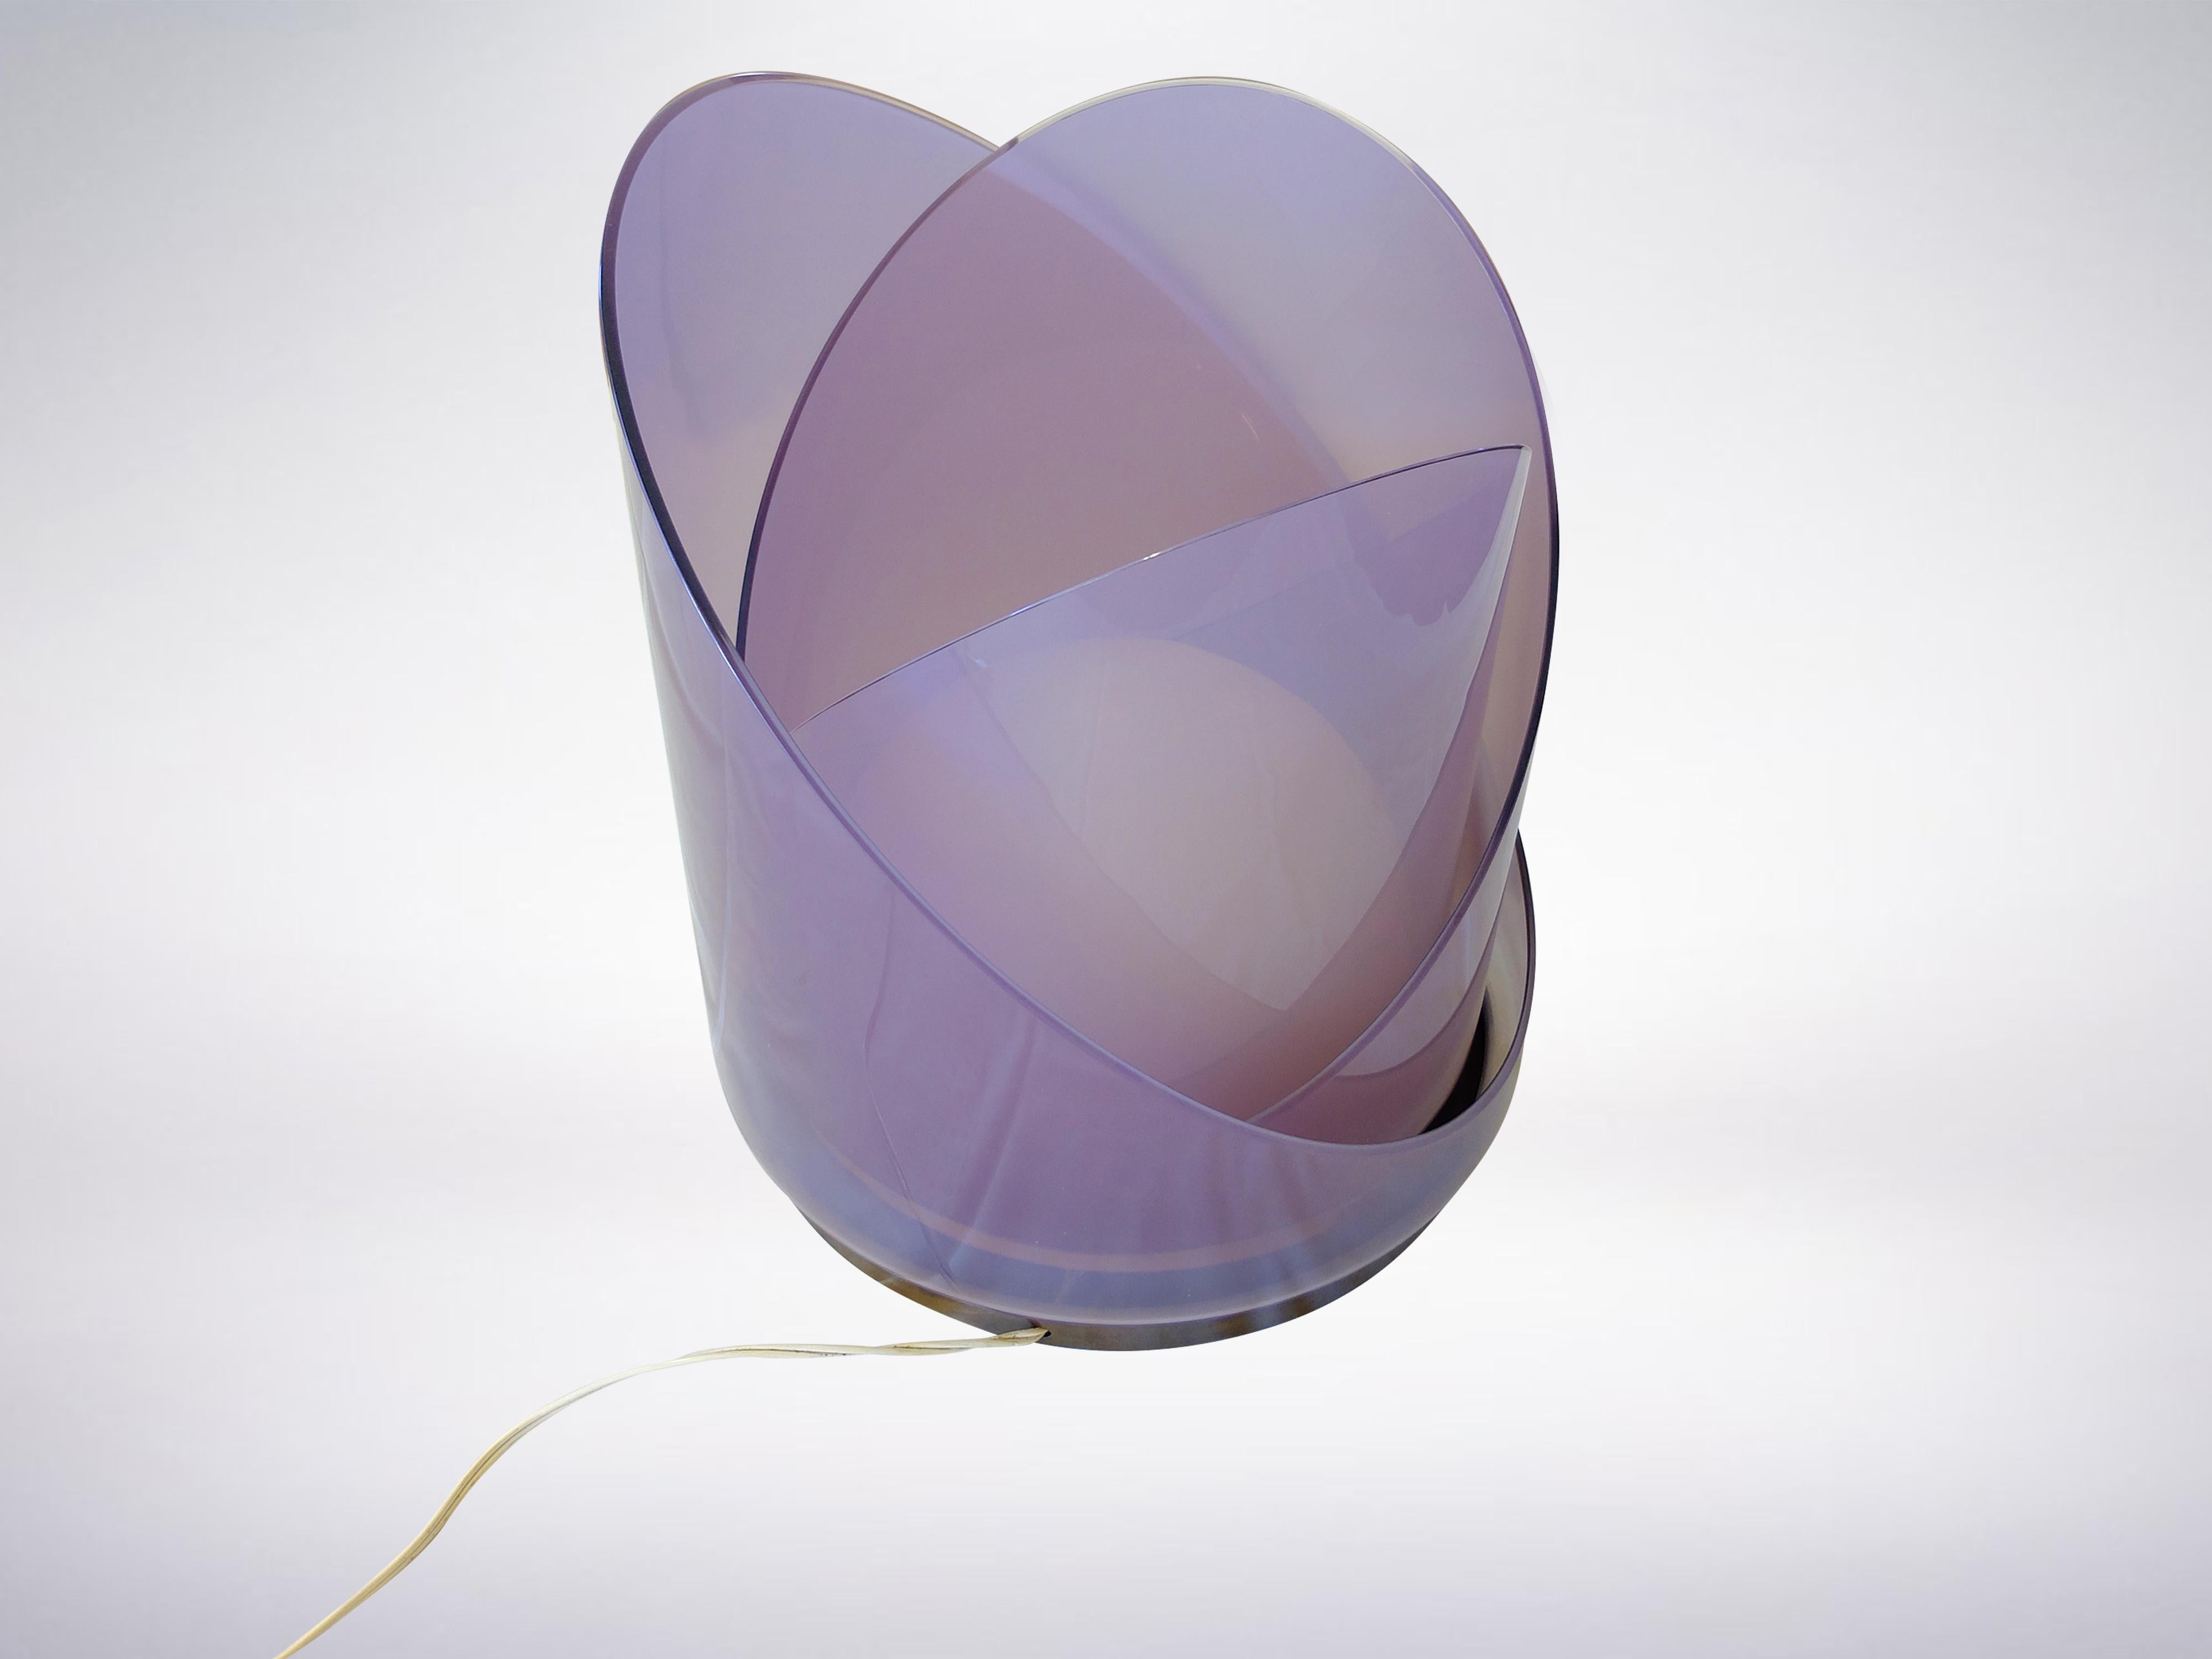 A lovely lilac tinted glass, of three layers incompasses the central luminous globe to form the original LT300 lamp designed by Carlo Nason for Mazzega in the 1970s.
All original wiring and lamp is intact.